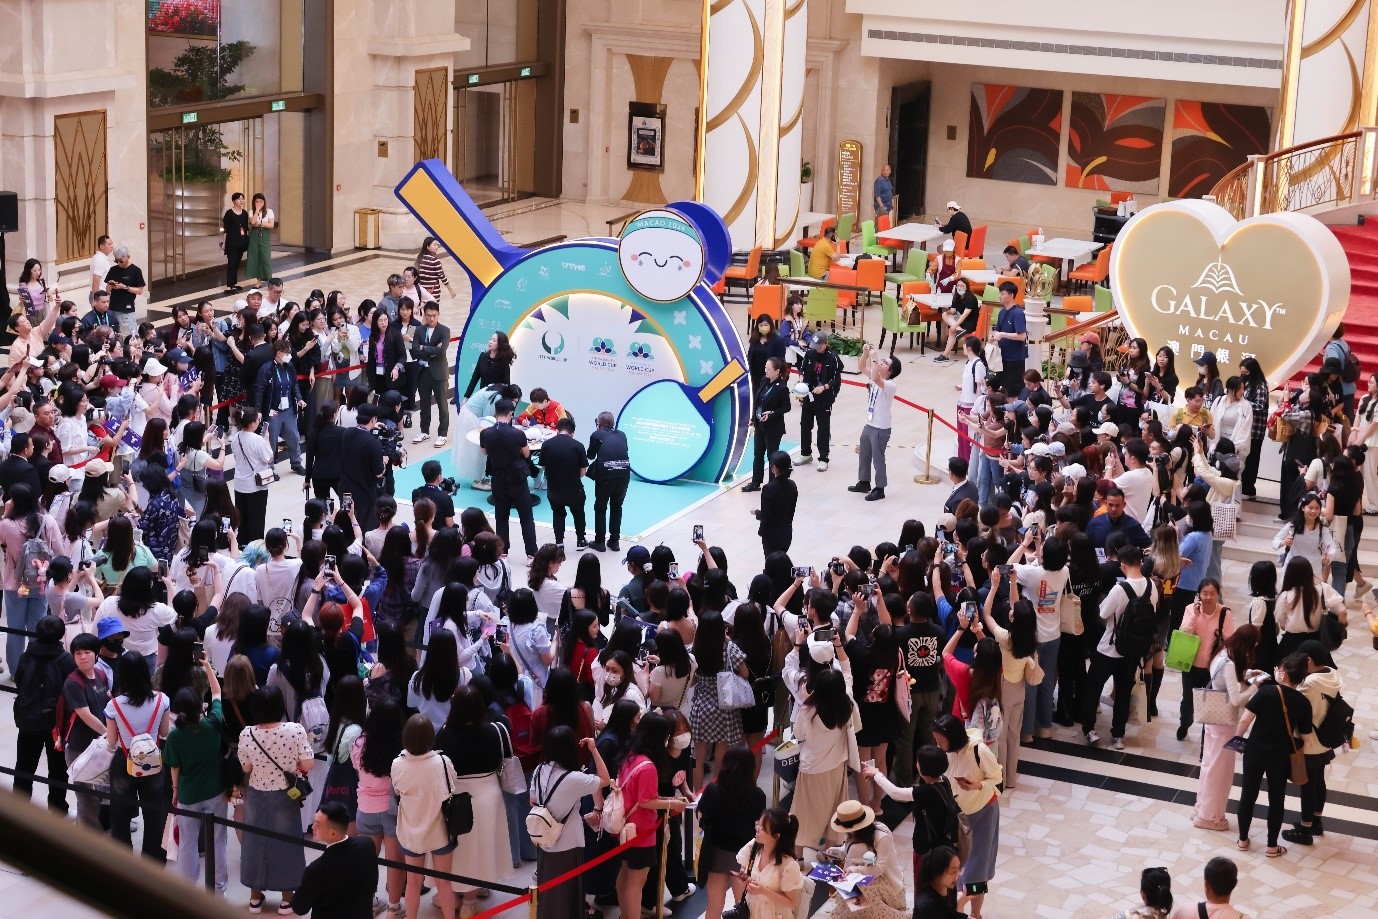 During the event, several autograph sessions were held at the East Square of Galaxy Macau, where the world’s leading table tennis players were invited to interact with and present autographs to table tennis enthusiasts, creating a lively atmosphere.